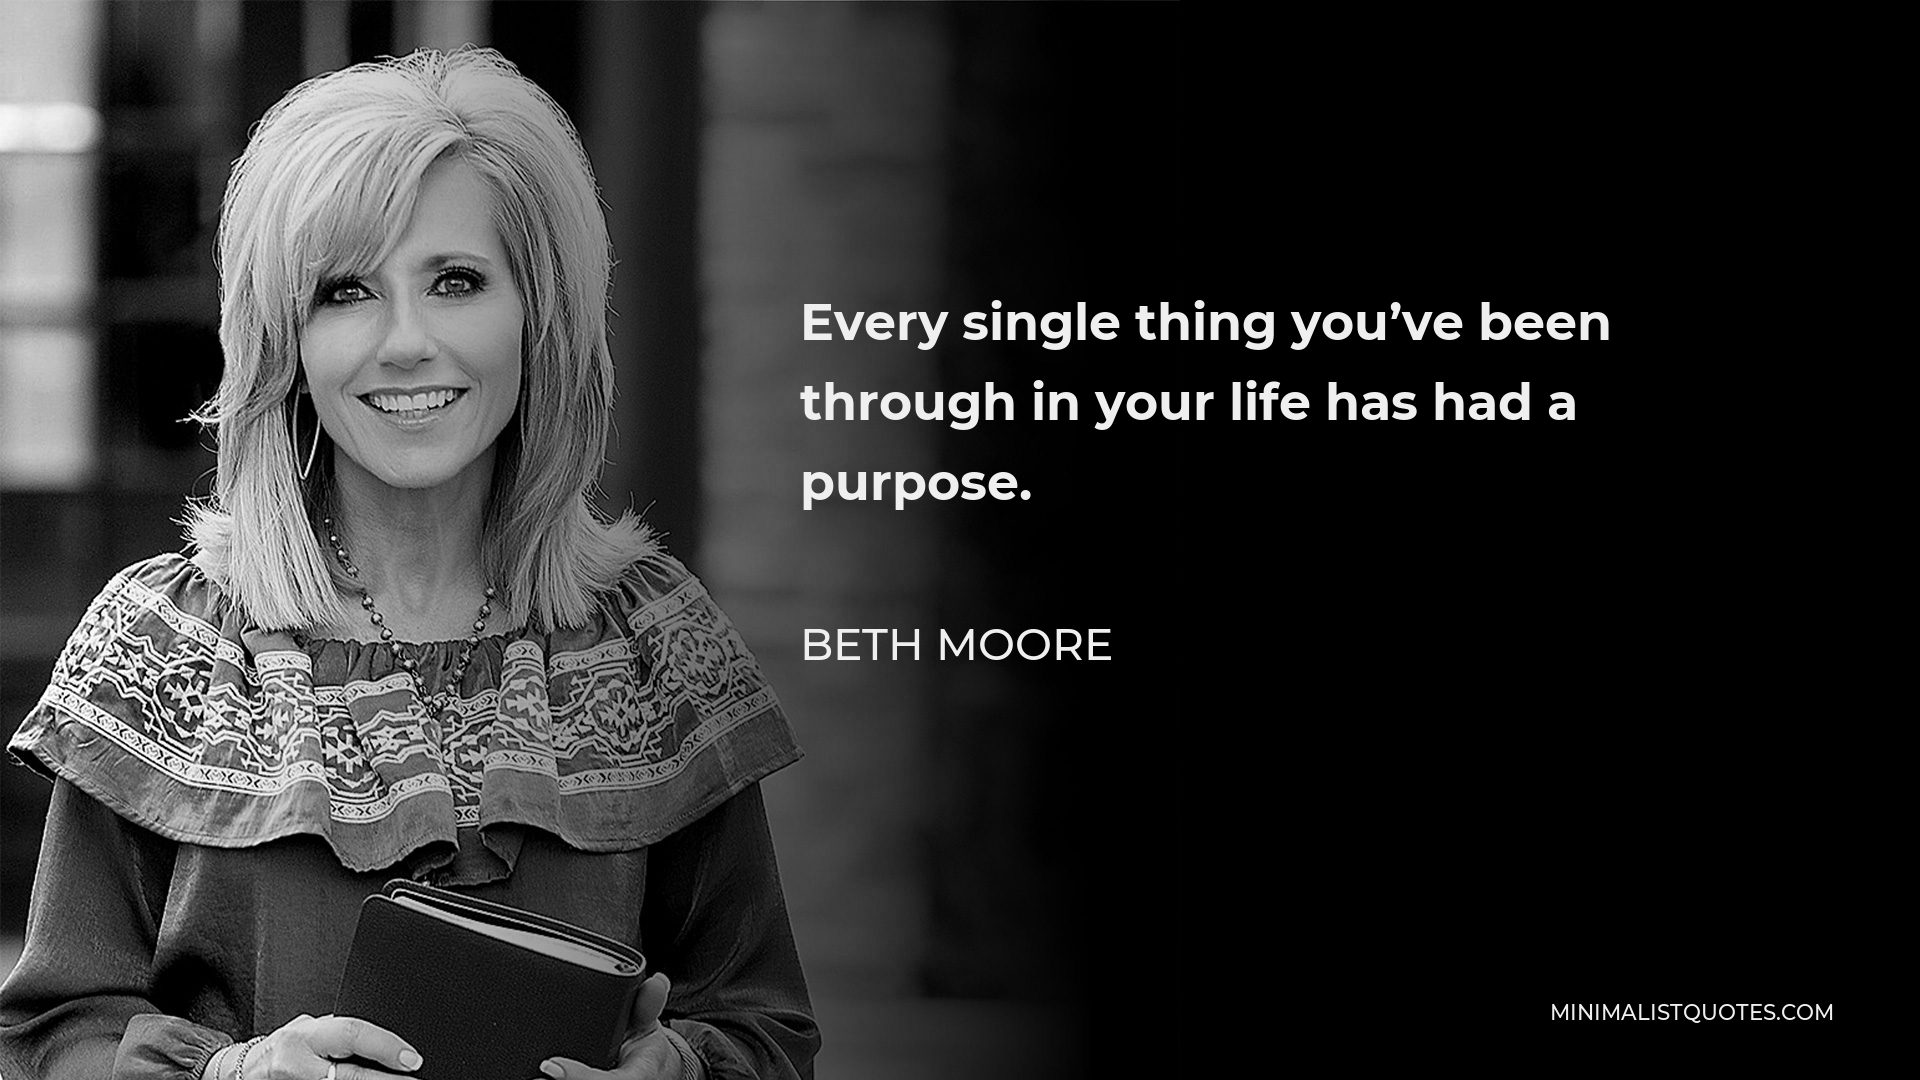 Beth Moore Quote - Every single thing you’ve been through in your life has had a purpose.